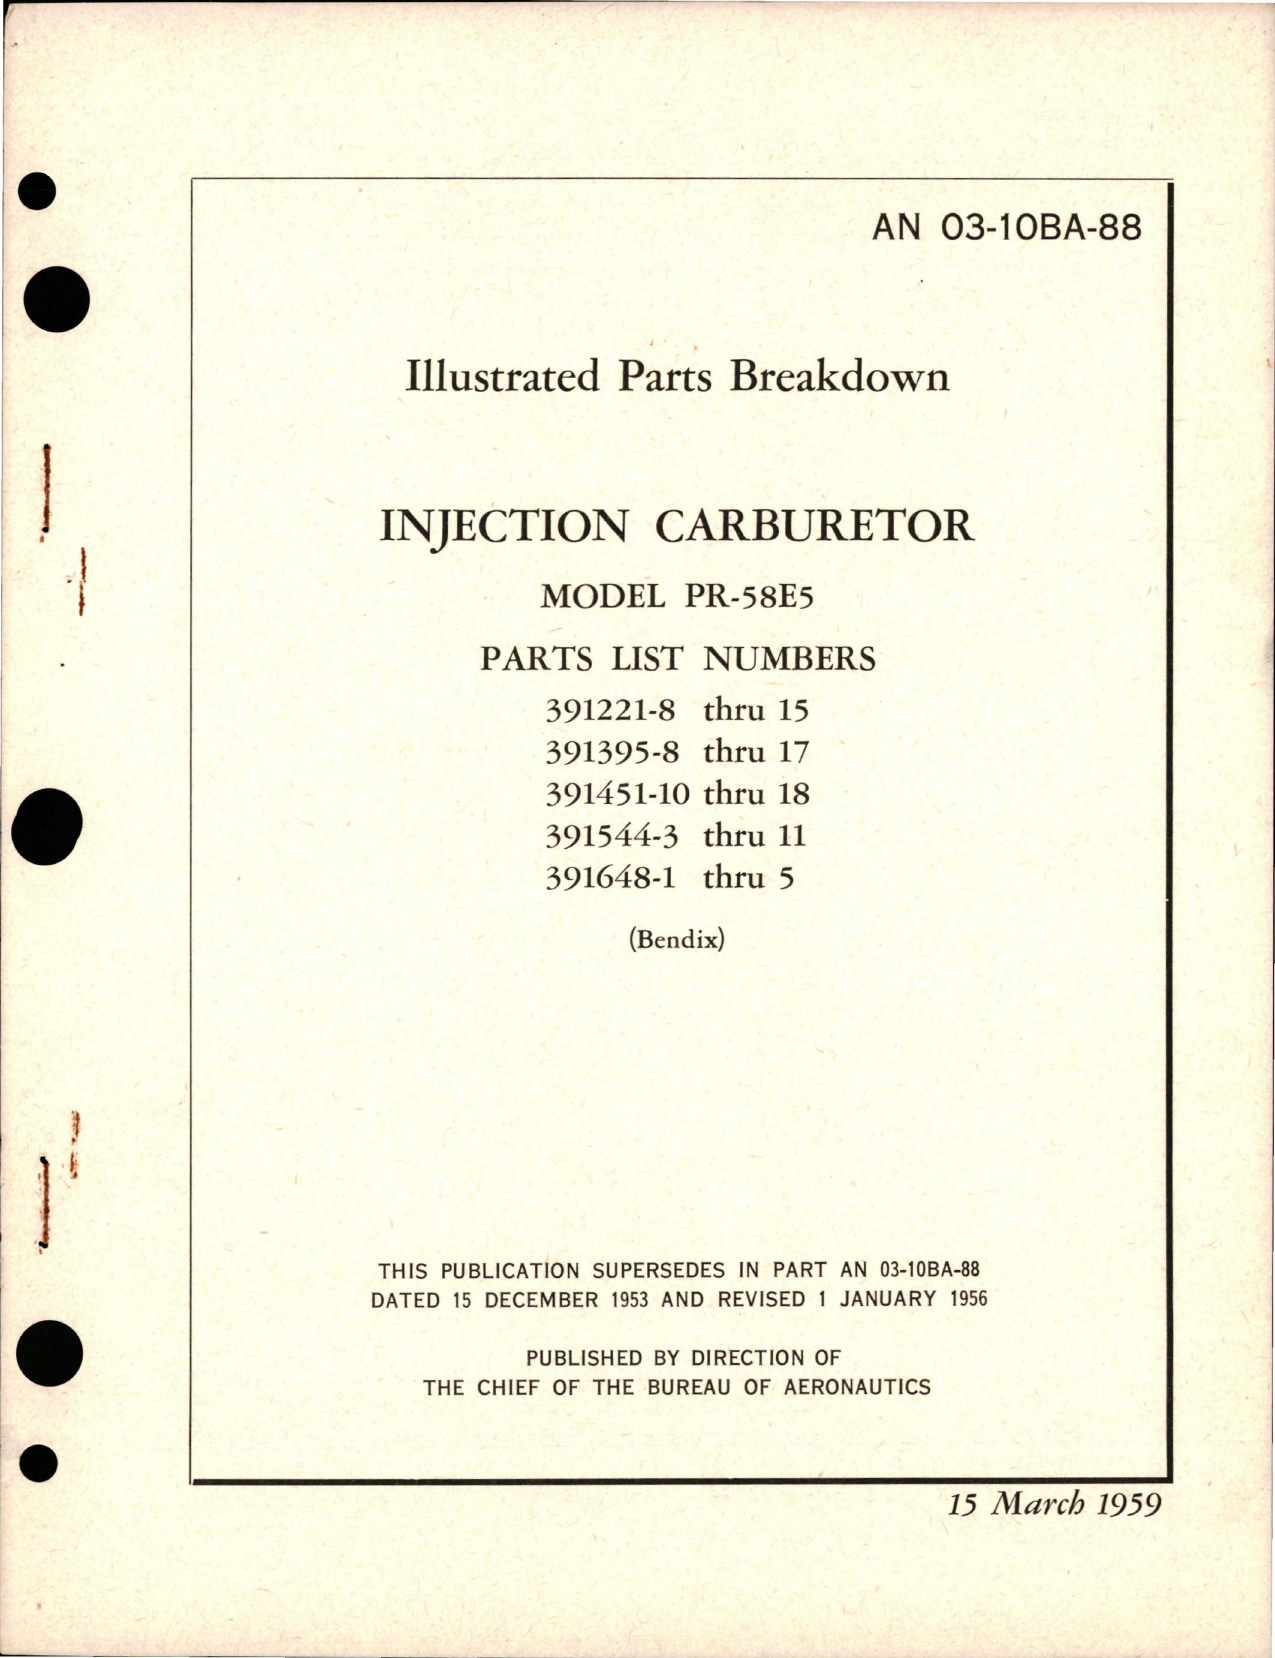 Sample page 1 from AirCorps Library document: Illustrated Parts Breakdown for Injection Carburetor - Model PR-58E5 